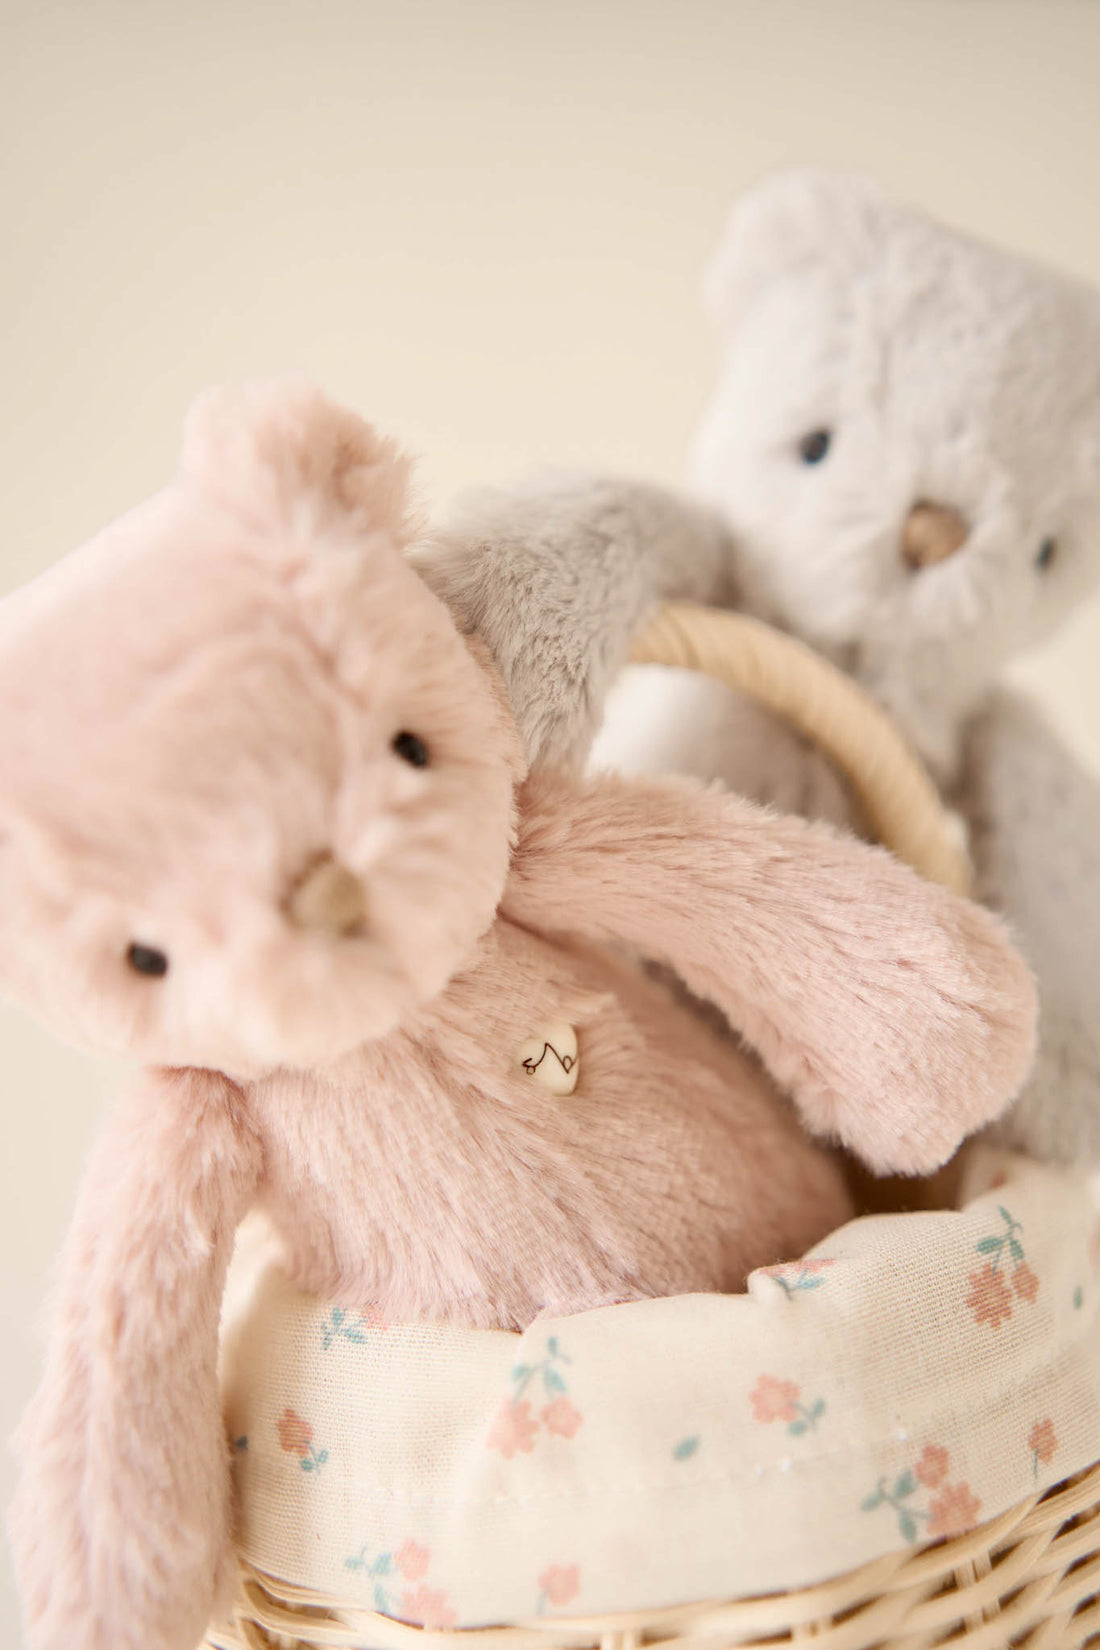 Snuggle Bunnies - George the Bear - Droplet Childrens Toy from Jamie Kay NZ